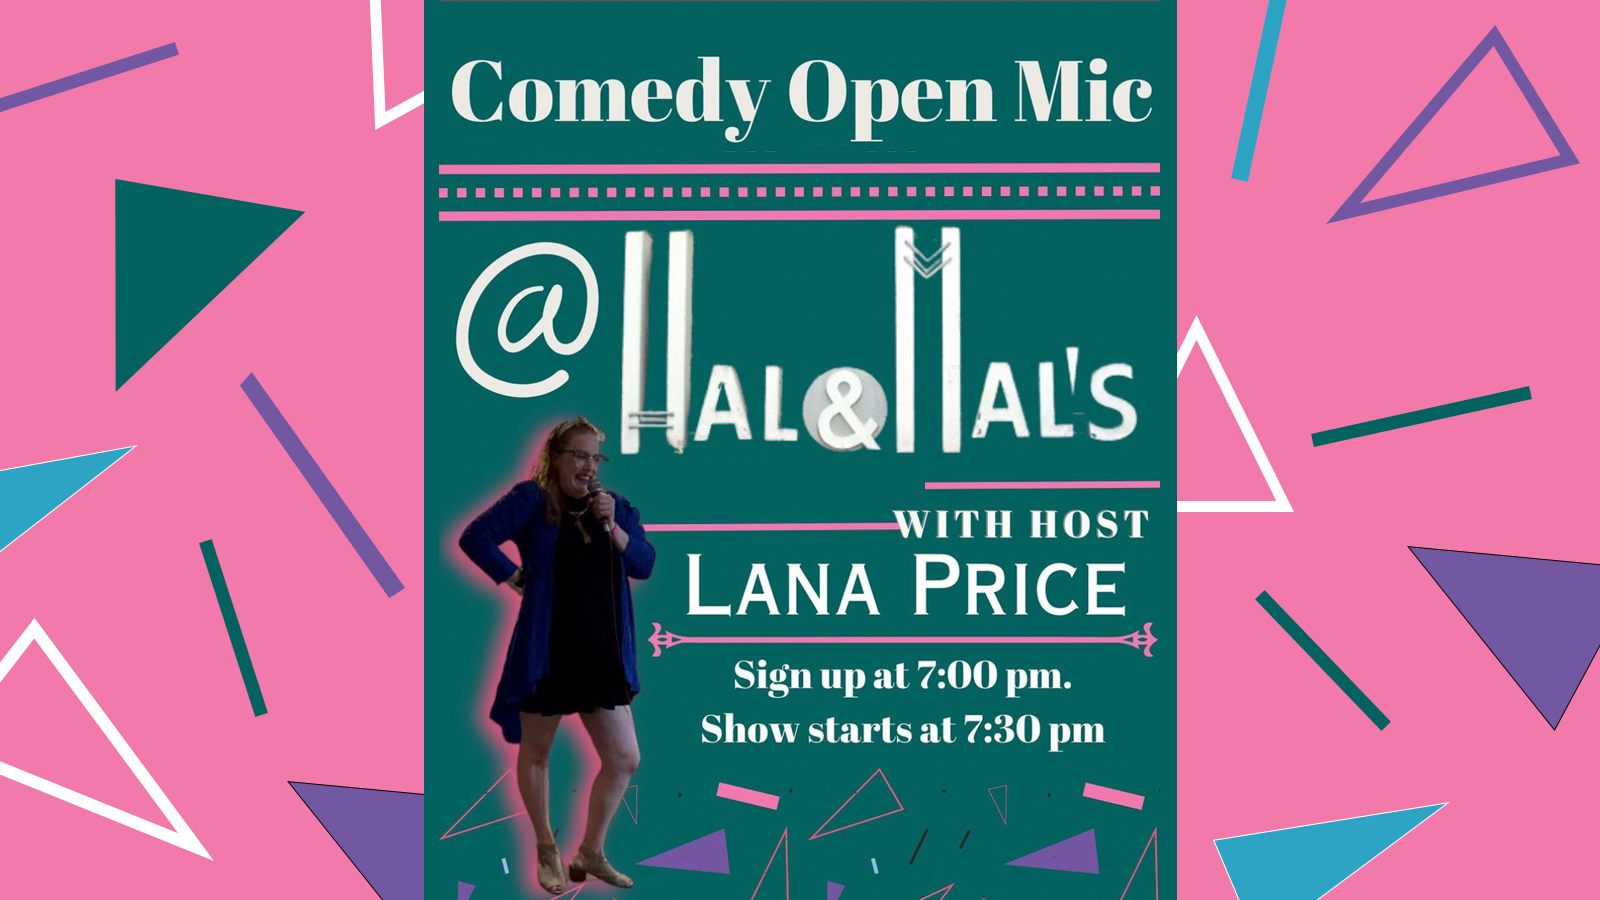 Comedy Open Mic Night at Hal & Mal’s